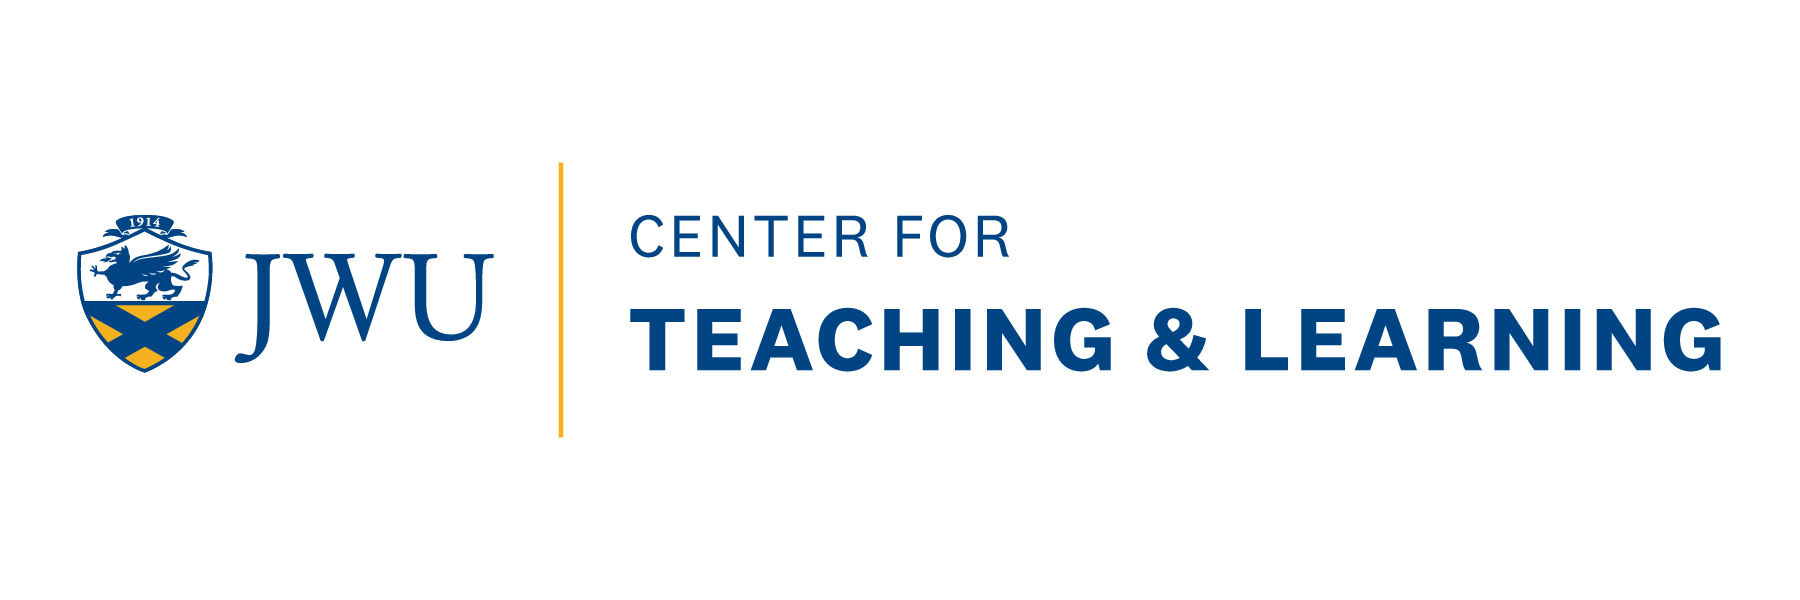 JWU Center for Teaching and Learning logo